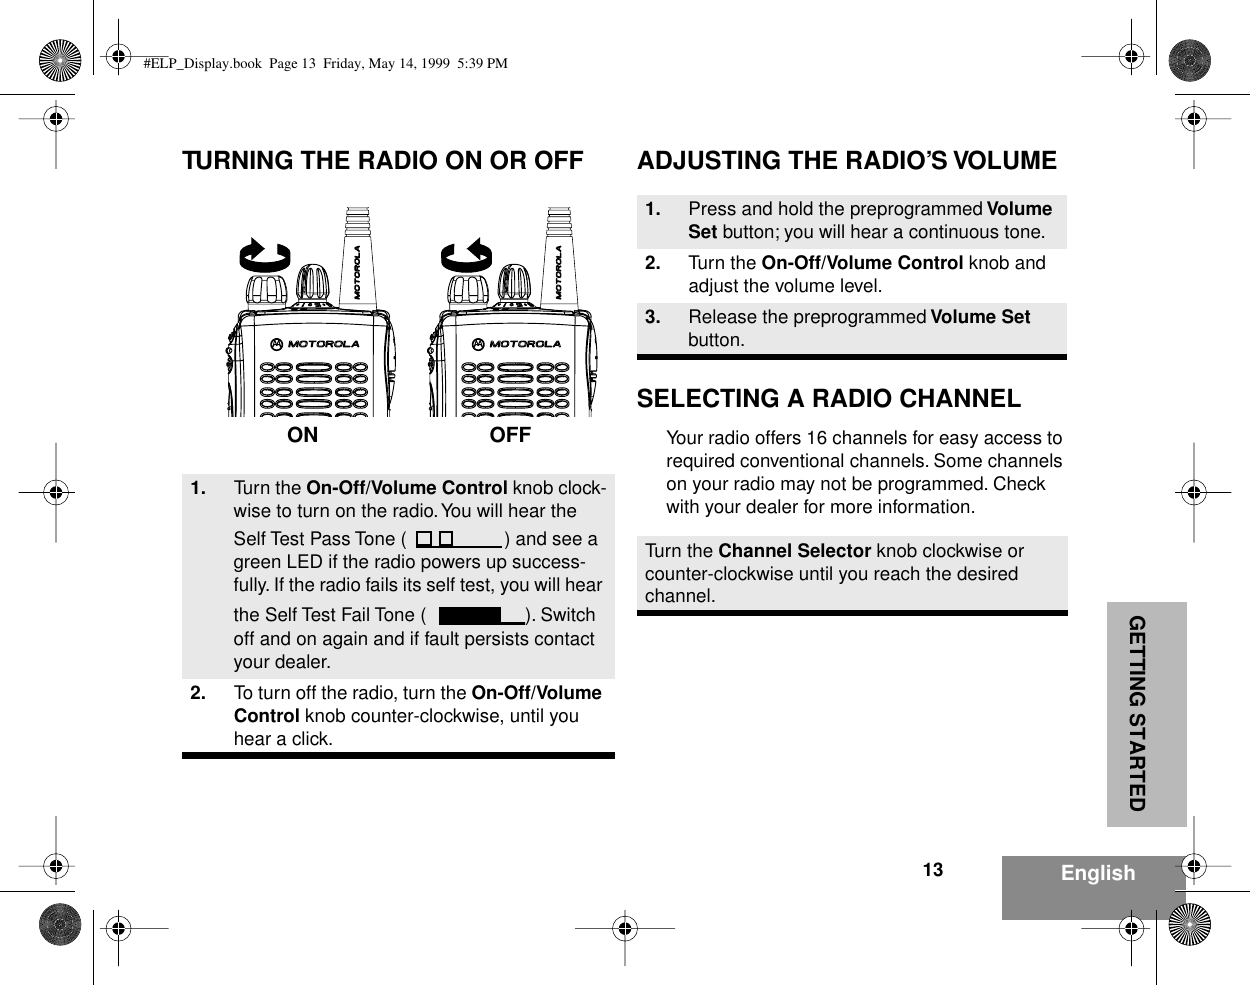  GETTING STARTED 13 English TURNING THE RADIO ON OR OFF ADJUSTING THE RADIO’S VOLUMESELECTING A RADIO CHANNEL Your radio offers 16 channels for easy access to required conventional channels. Some channels on your radio may not be programmed. Check with your dealer for more information. 1. Turn the  On-Off/Volume Control  knob clock-wise to turn on the radio. You will hear the Self Test Pass Tone ( ) and see a green LED if the radio powers up success-fully. If the radio fails its self test, you will hear the Self Test Fail Tone ( ). Switch off and on again and if fault persists contact your dealer. 2. To turn off the radio, turn the  On-Off/Volume Control  knob counter-clockwise, until you hear a click.ON OFF 1. Press and hold the preprogrammed  Volume Set   button; you will hear a continuous tone. 2. Turn the  On-Off/Volume Control  knob and adjust the volume level. 3. Release the preprogrammed  Volume Set  button.Turn the  Channel Selector  knob clockwise or counter-clockwise until you reach the desired channel. #ELP_Display.book  Page 13  Friday, May 14, 1999  5:39 PM